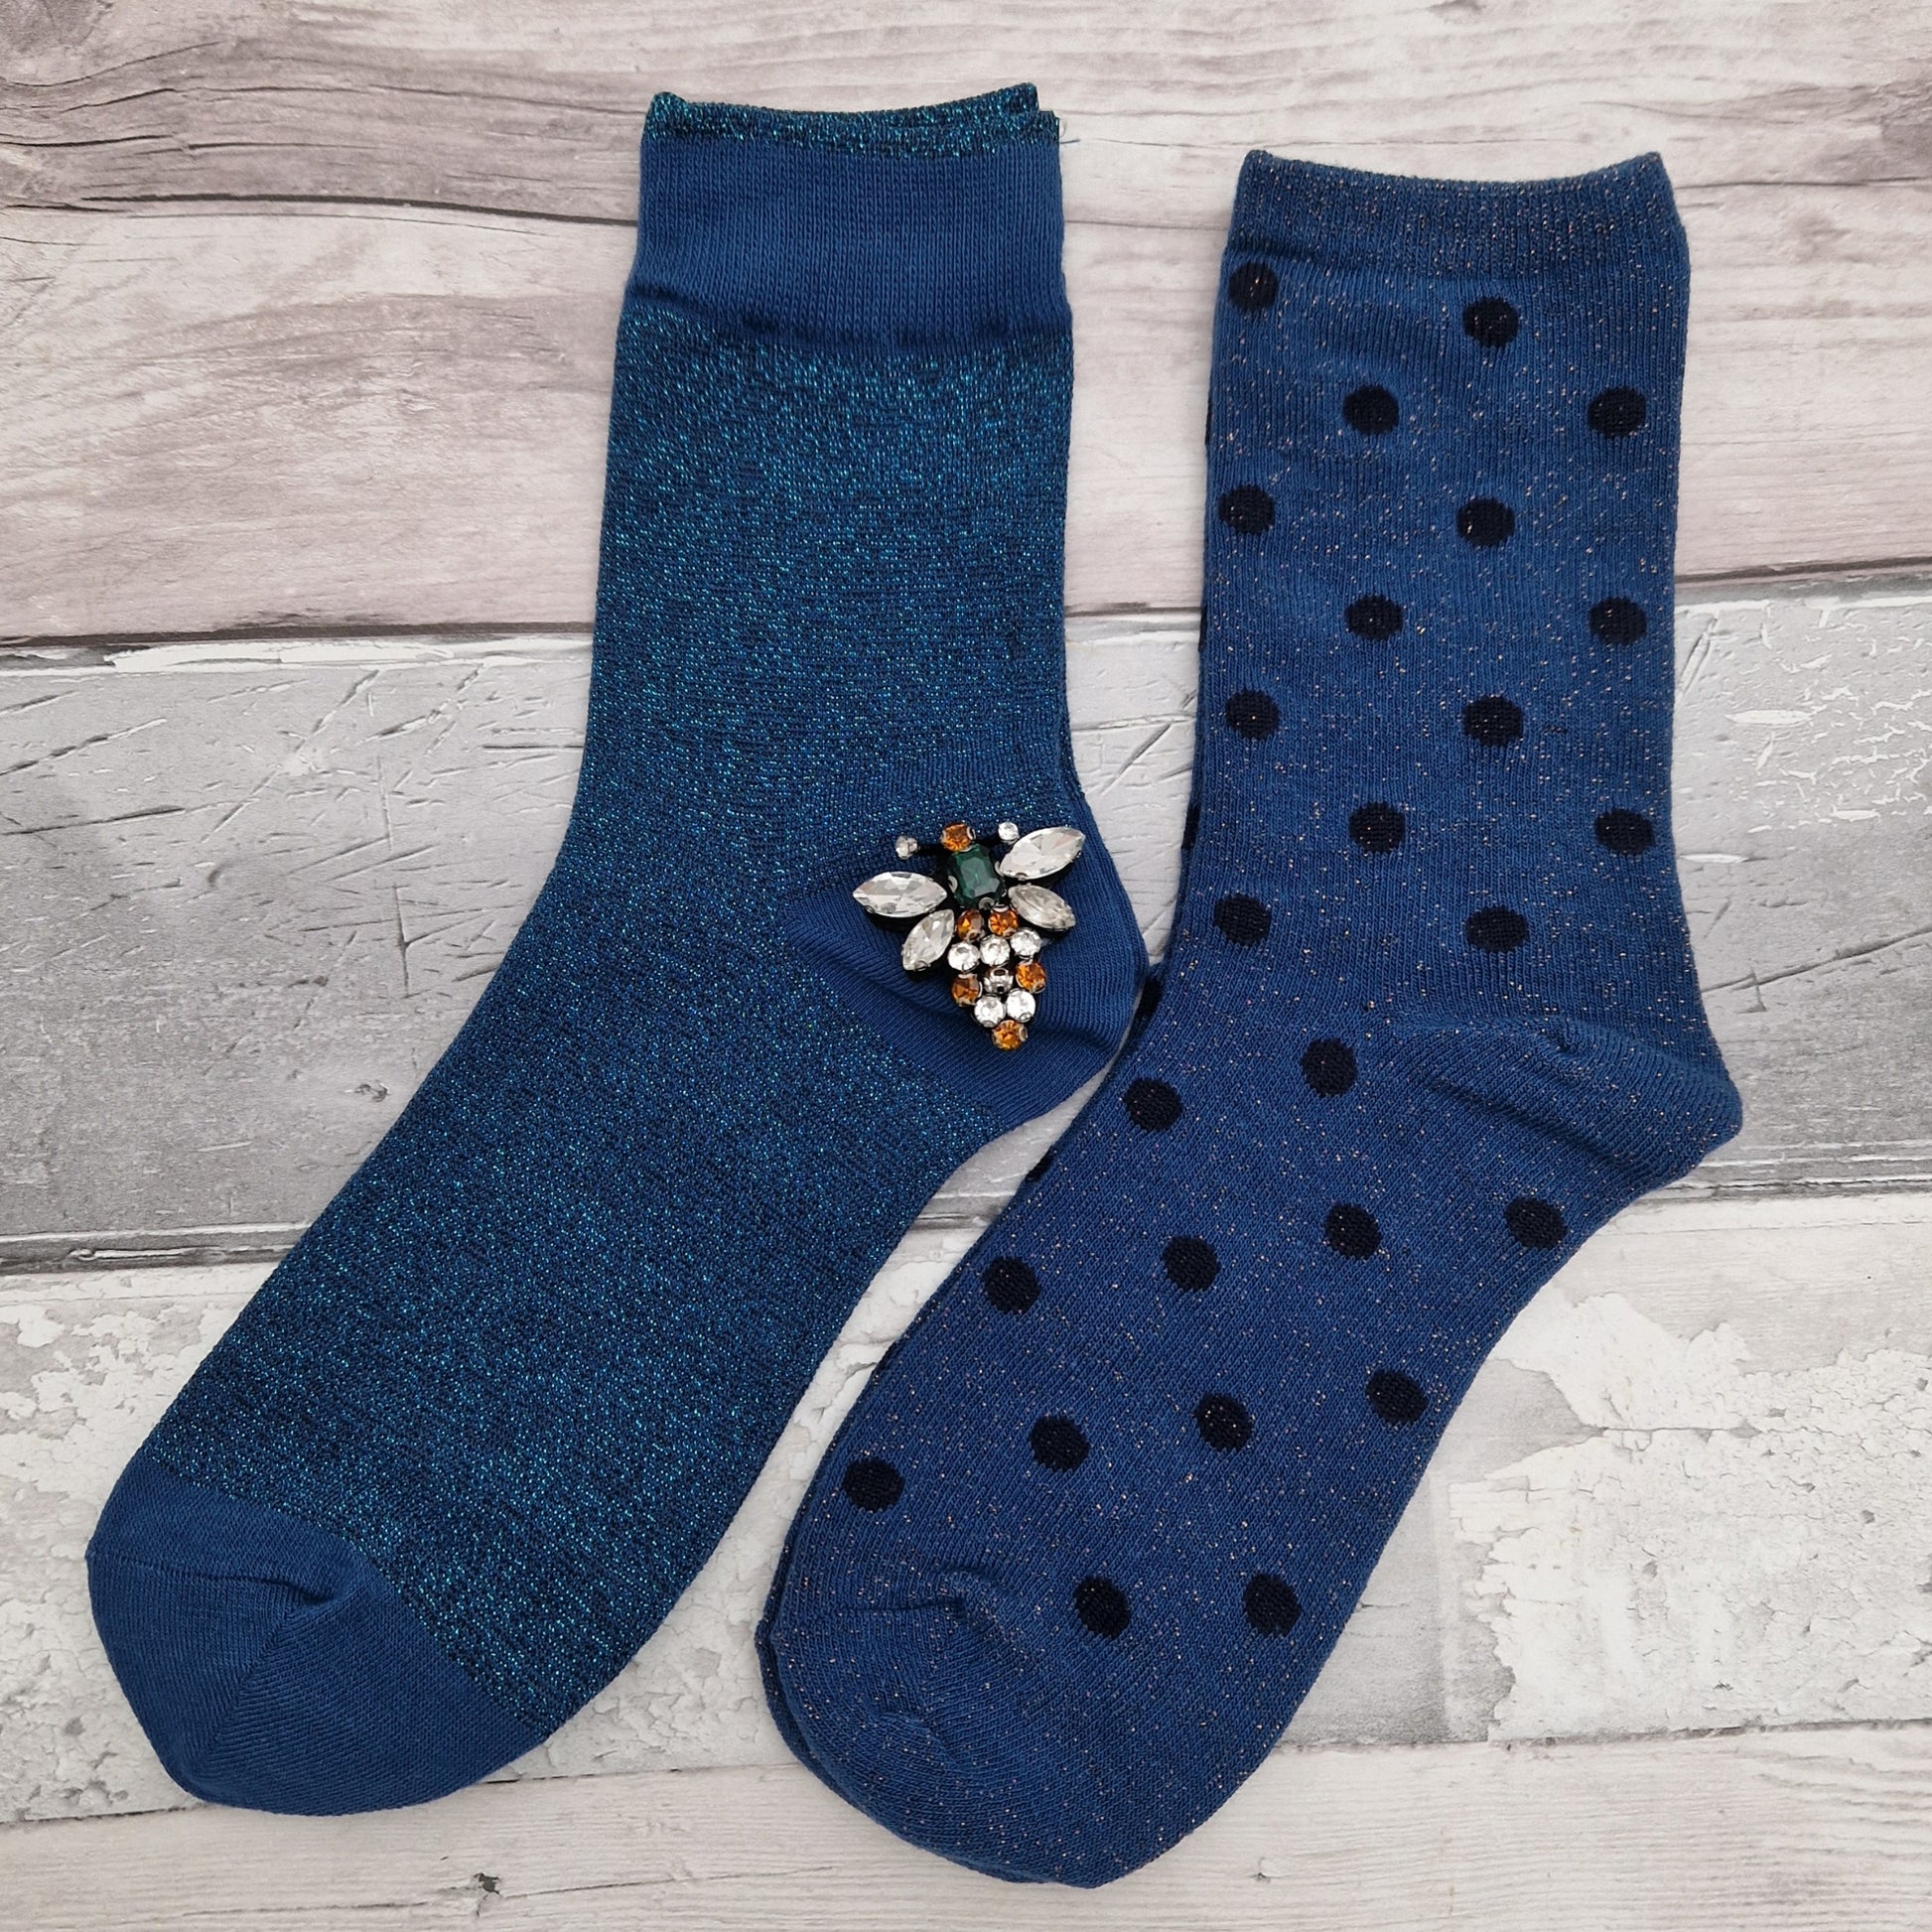 2 Pairs of blue coloured socks presented in a gift box with a sparkling Bee Brooch made of recycled glass.